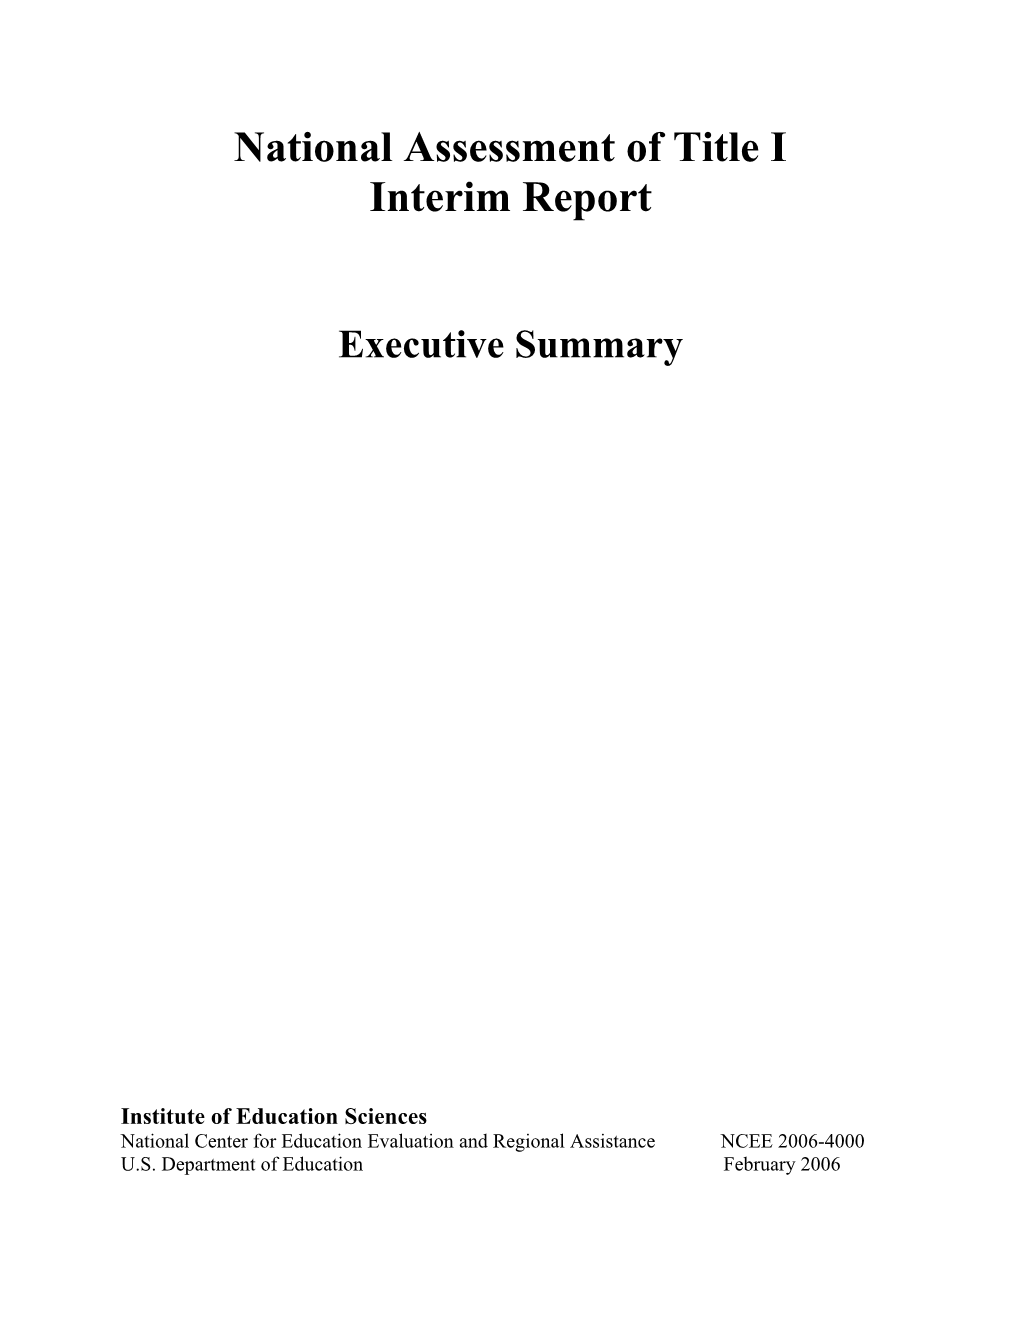 National Assessment of Title I Interim Report Executive Summary (MS Word)